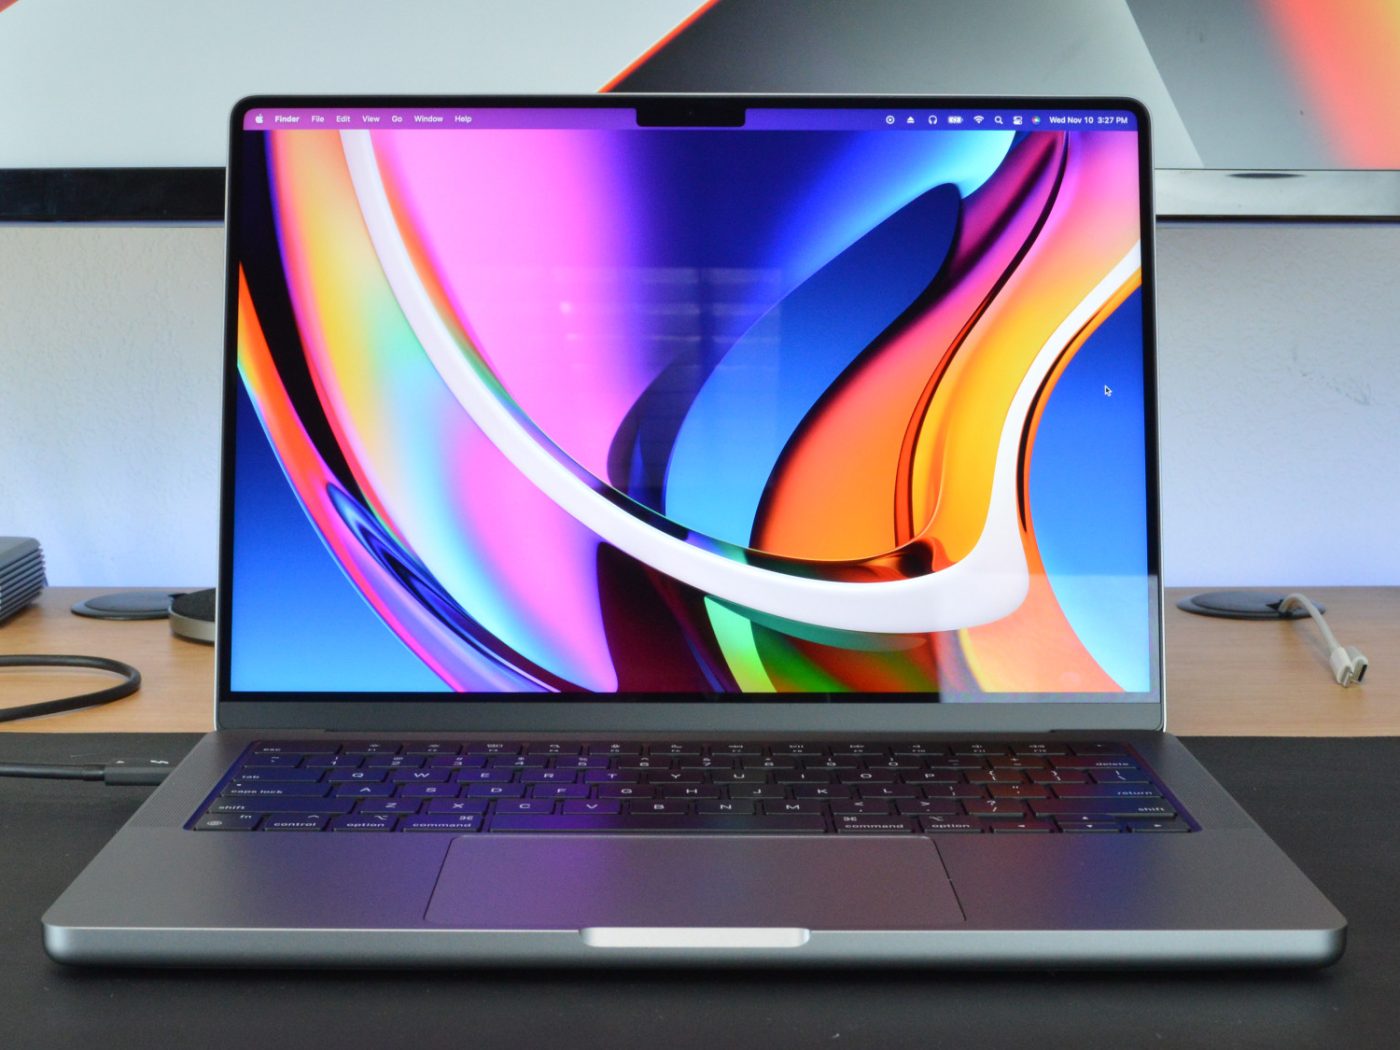 Here's how a $3,300 MacBook Pro can you money, according to Reddit engineer